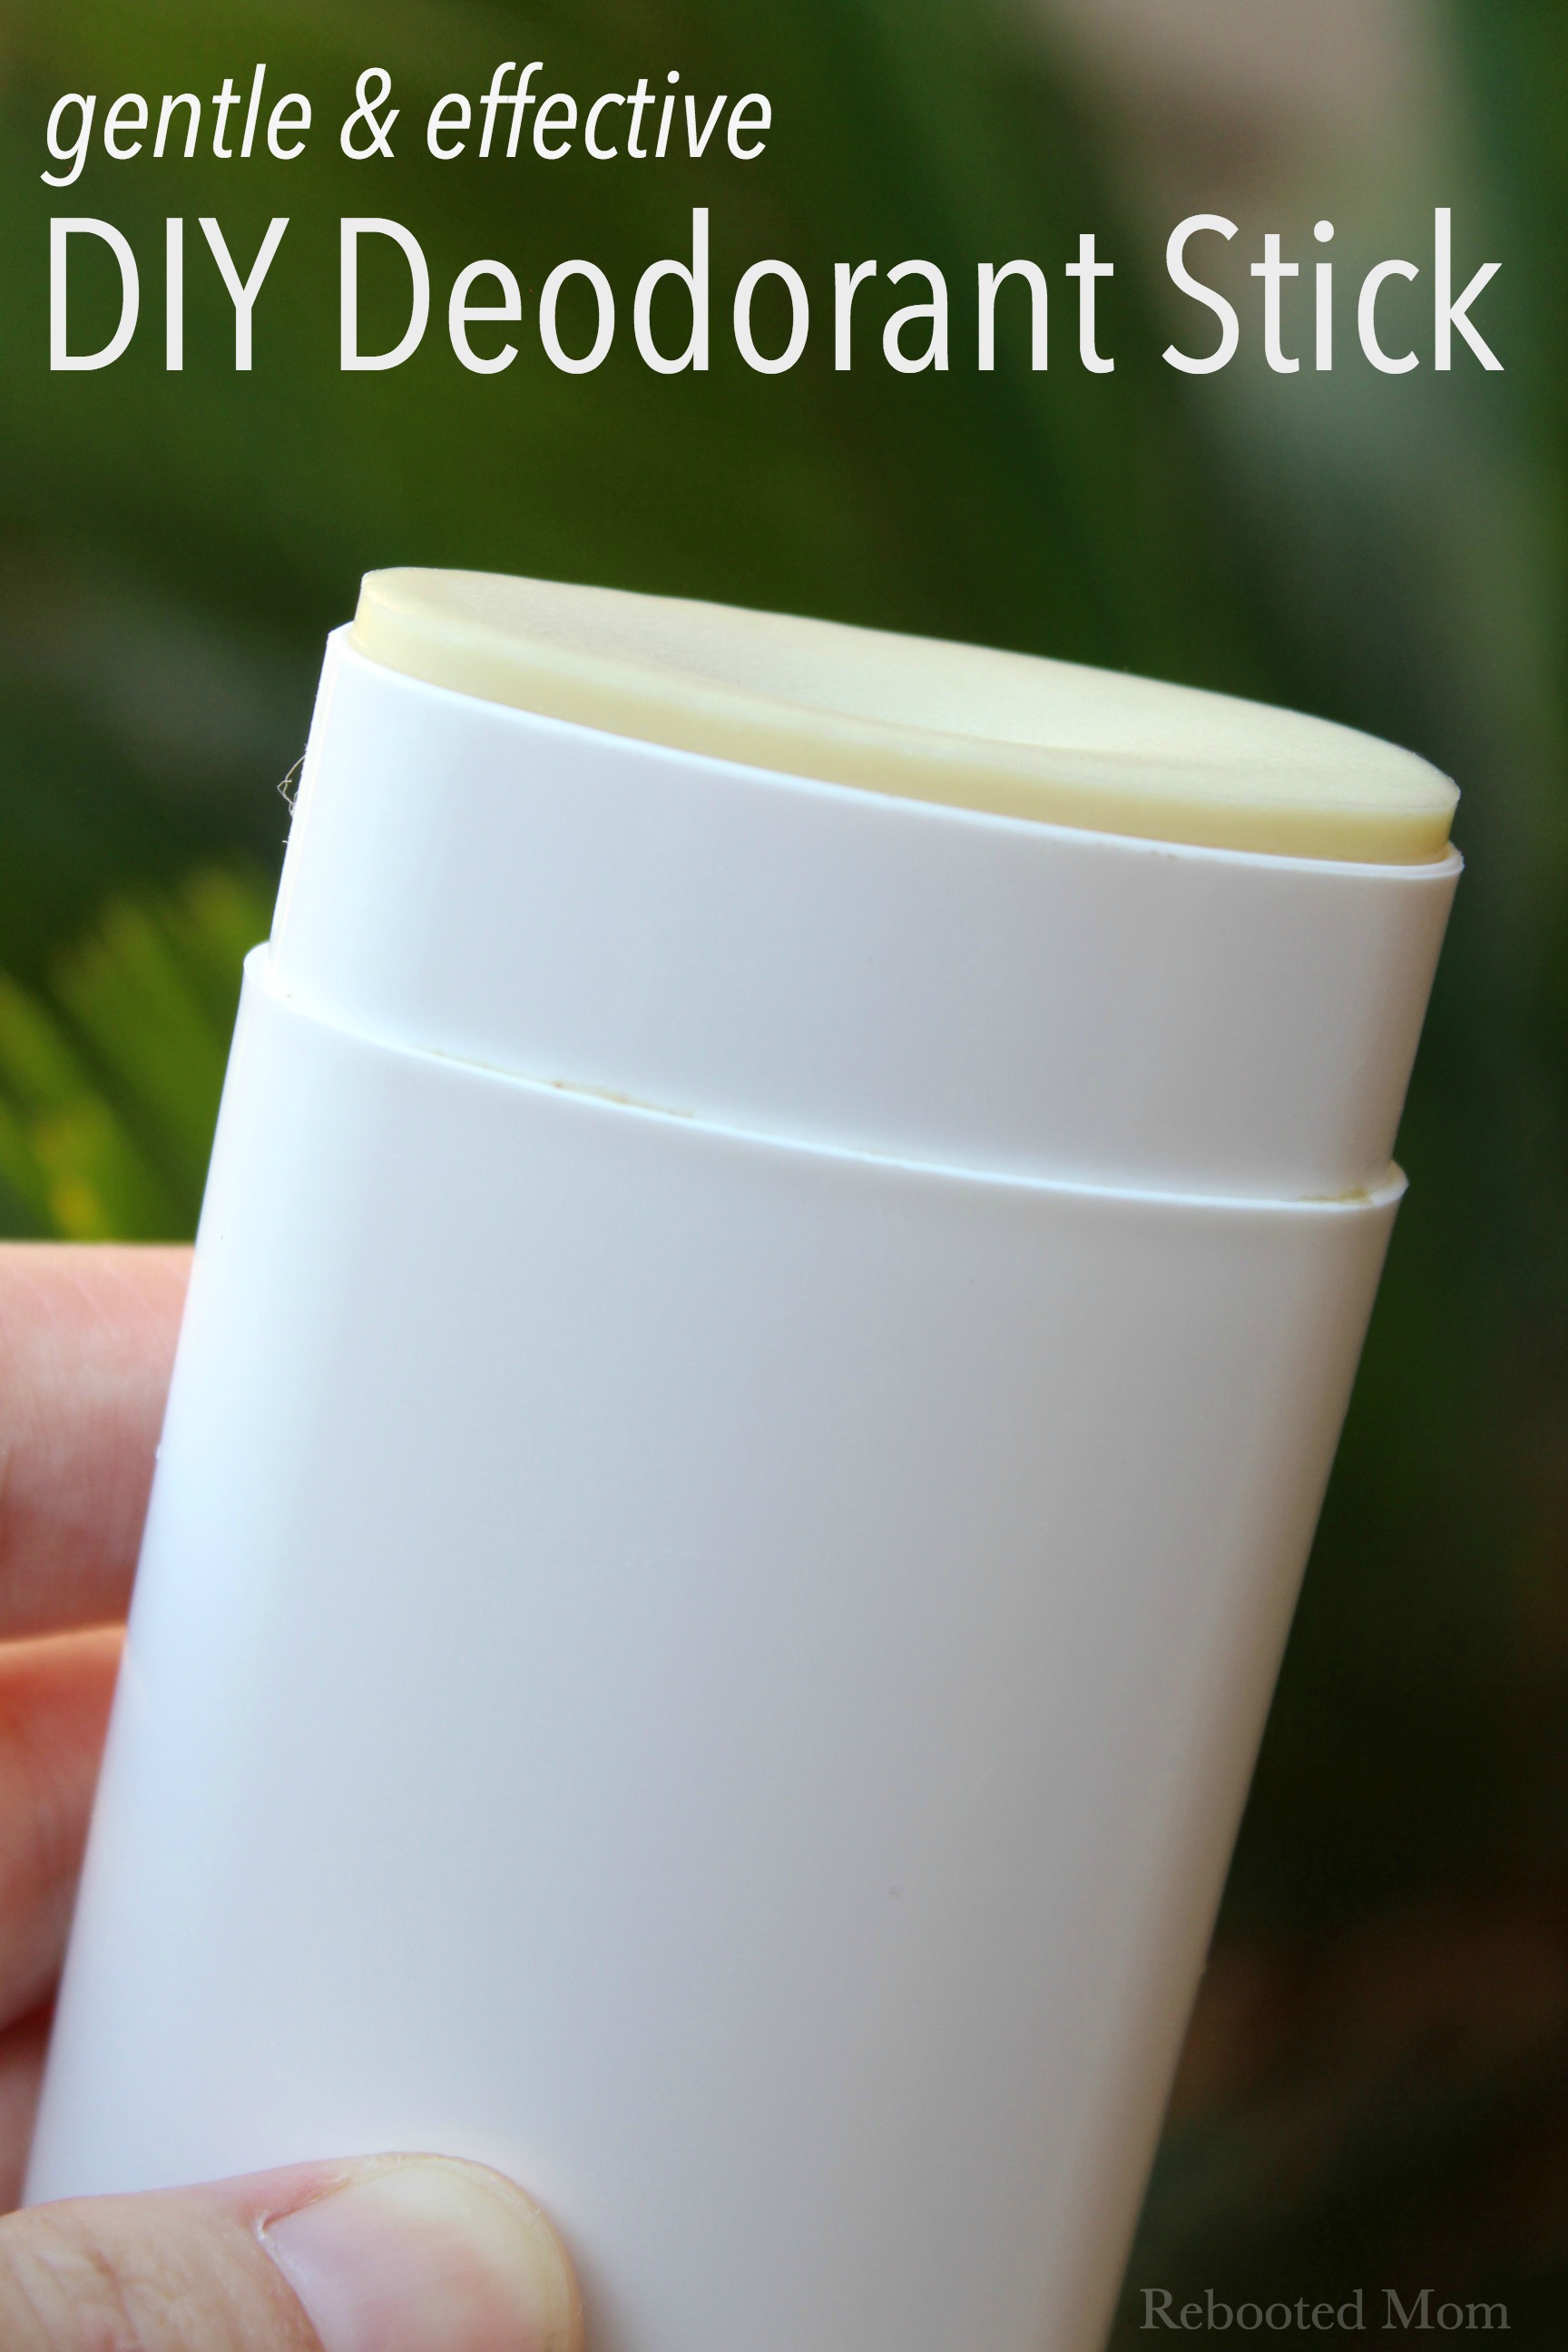 A fast and easy solid deodorant stick that's gentle, effective, and really works! This recipe makes 2 DIY deodorant sticks.